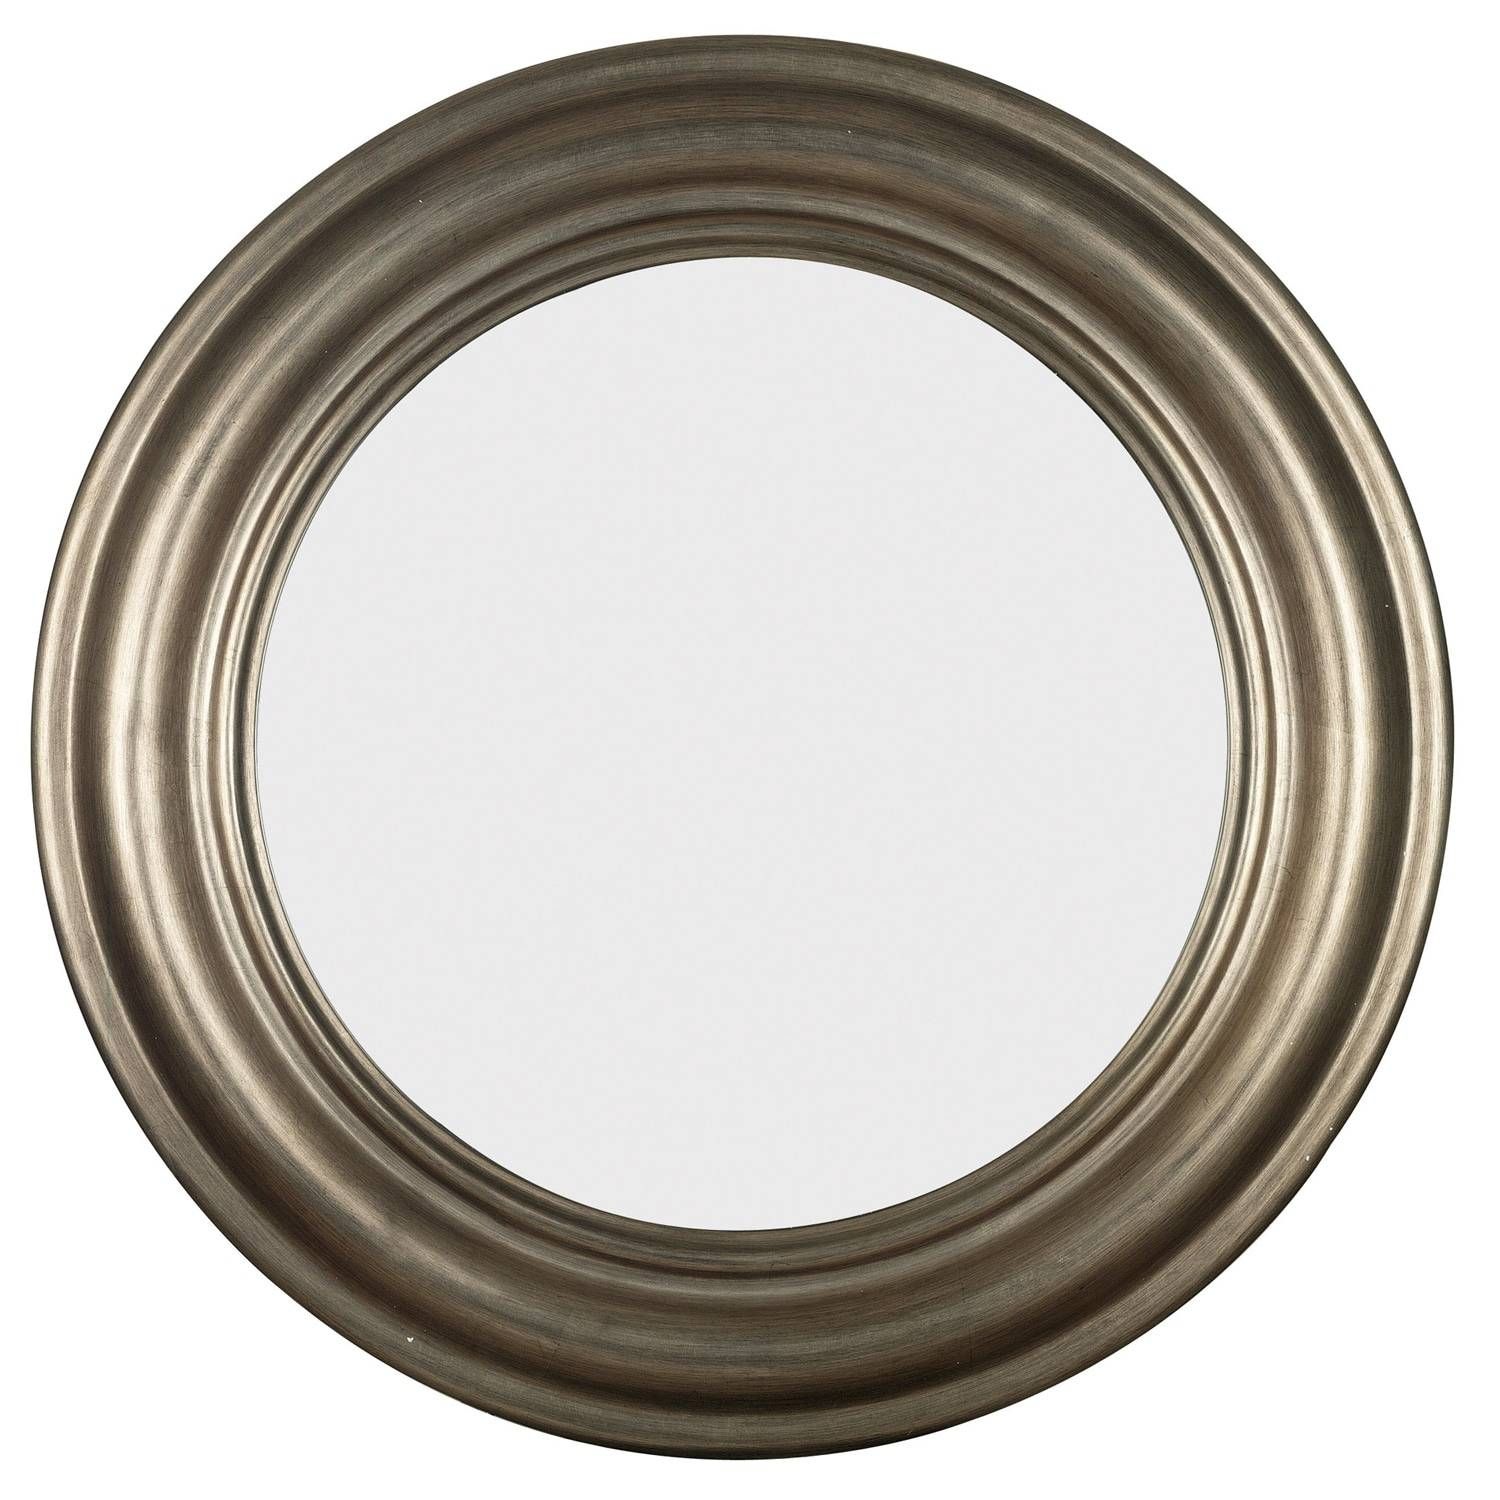 Pasco Round Antique Silver Wall Mirror – Free Shipping Today Throughout Round Antique Mirrors (View 3 of 15)